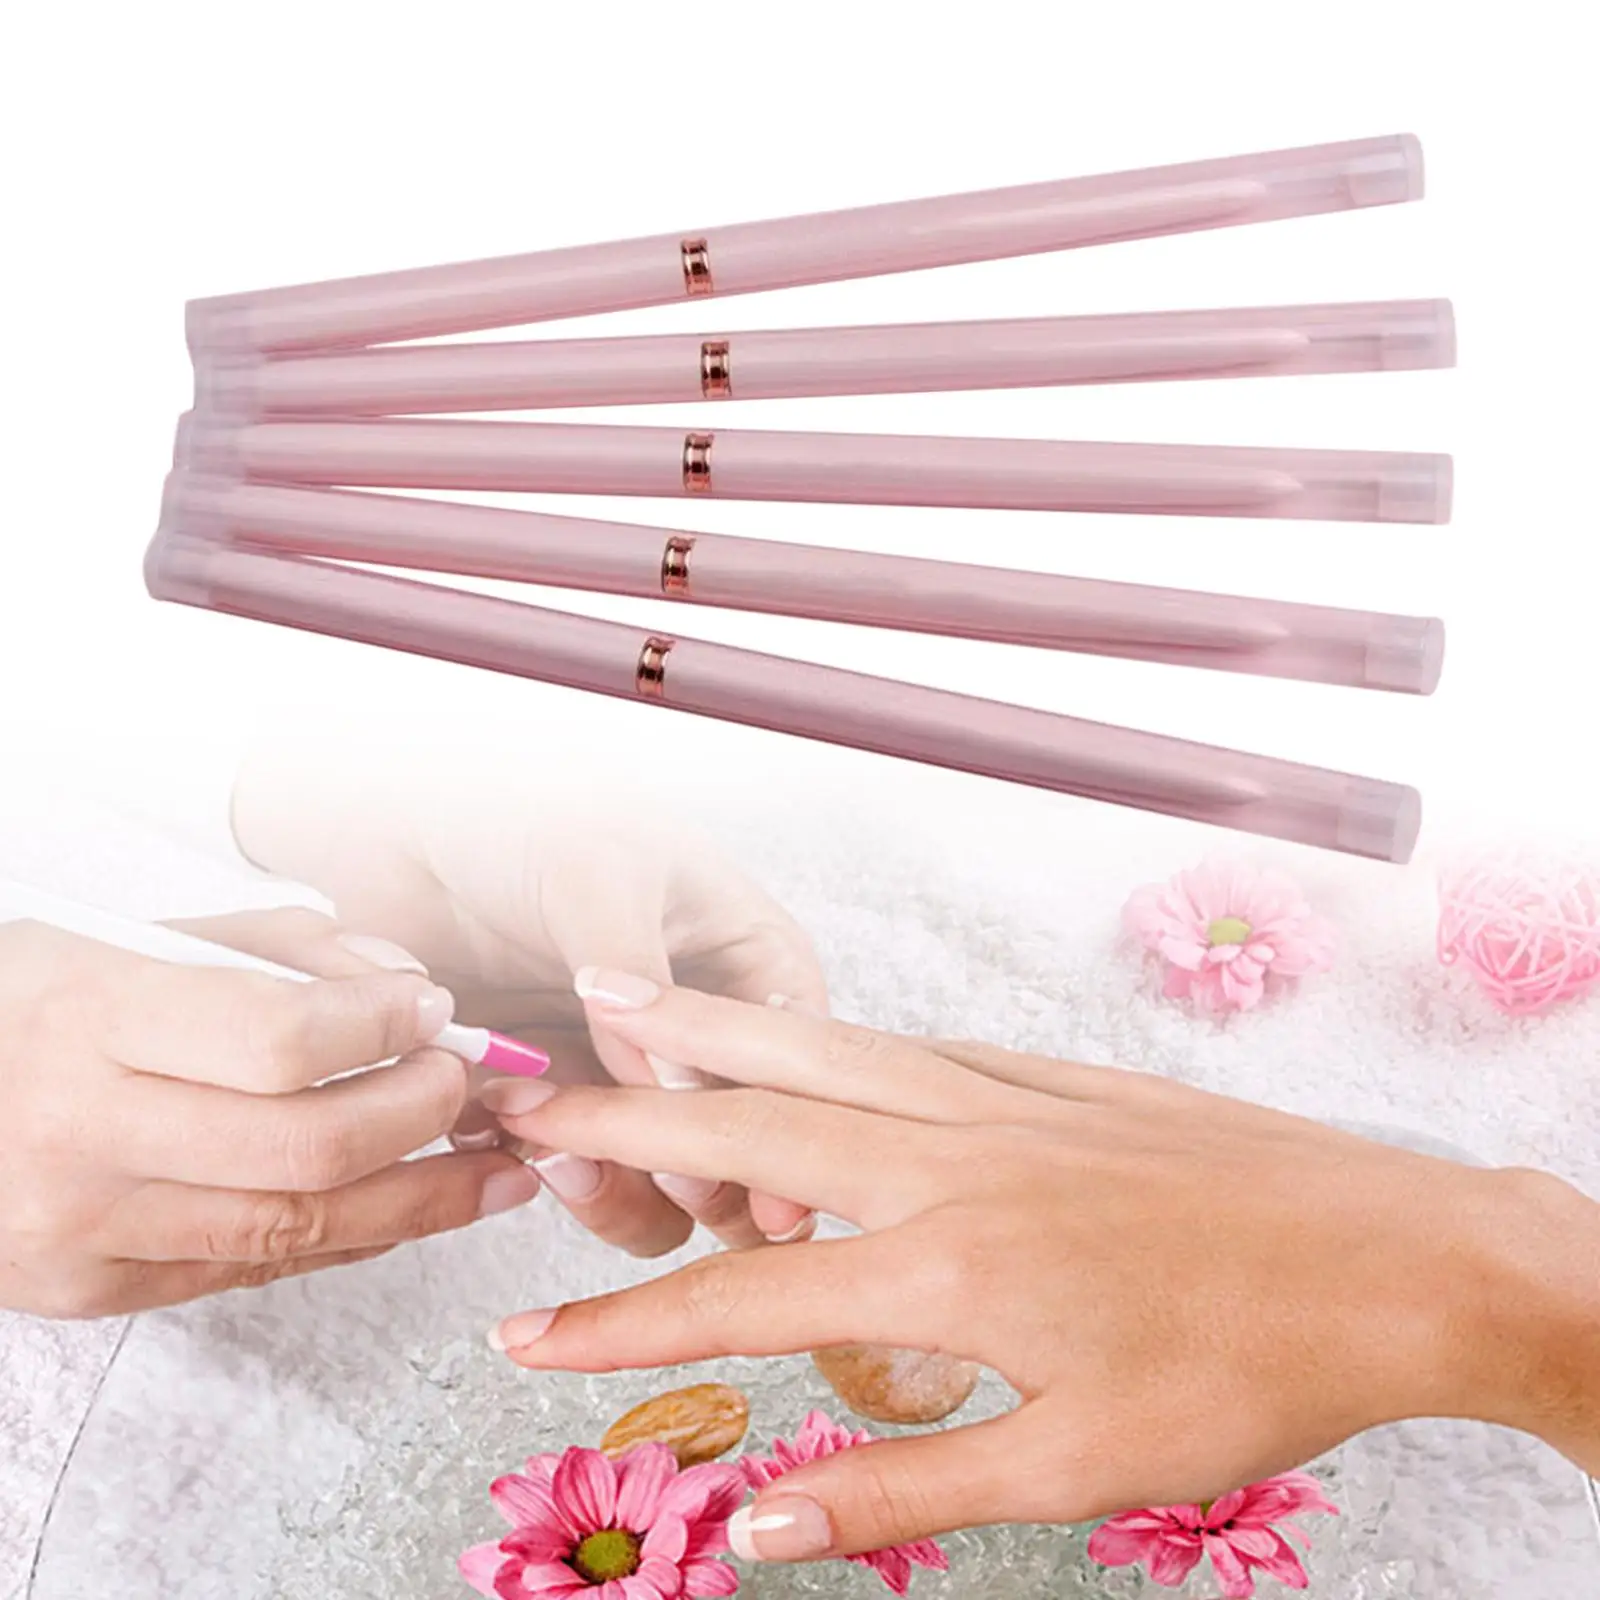 5 Pieces Nail Art Liner Brush Set for Thin Details Nail Art Fine Designs